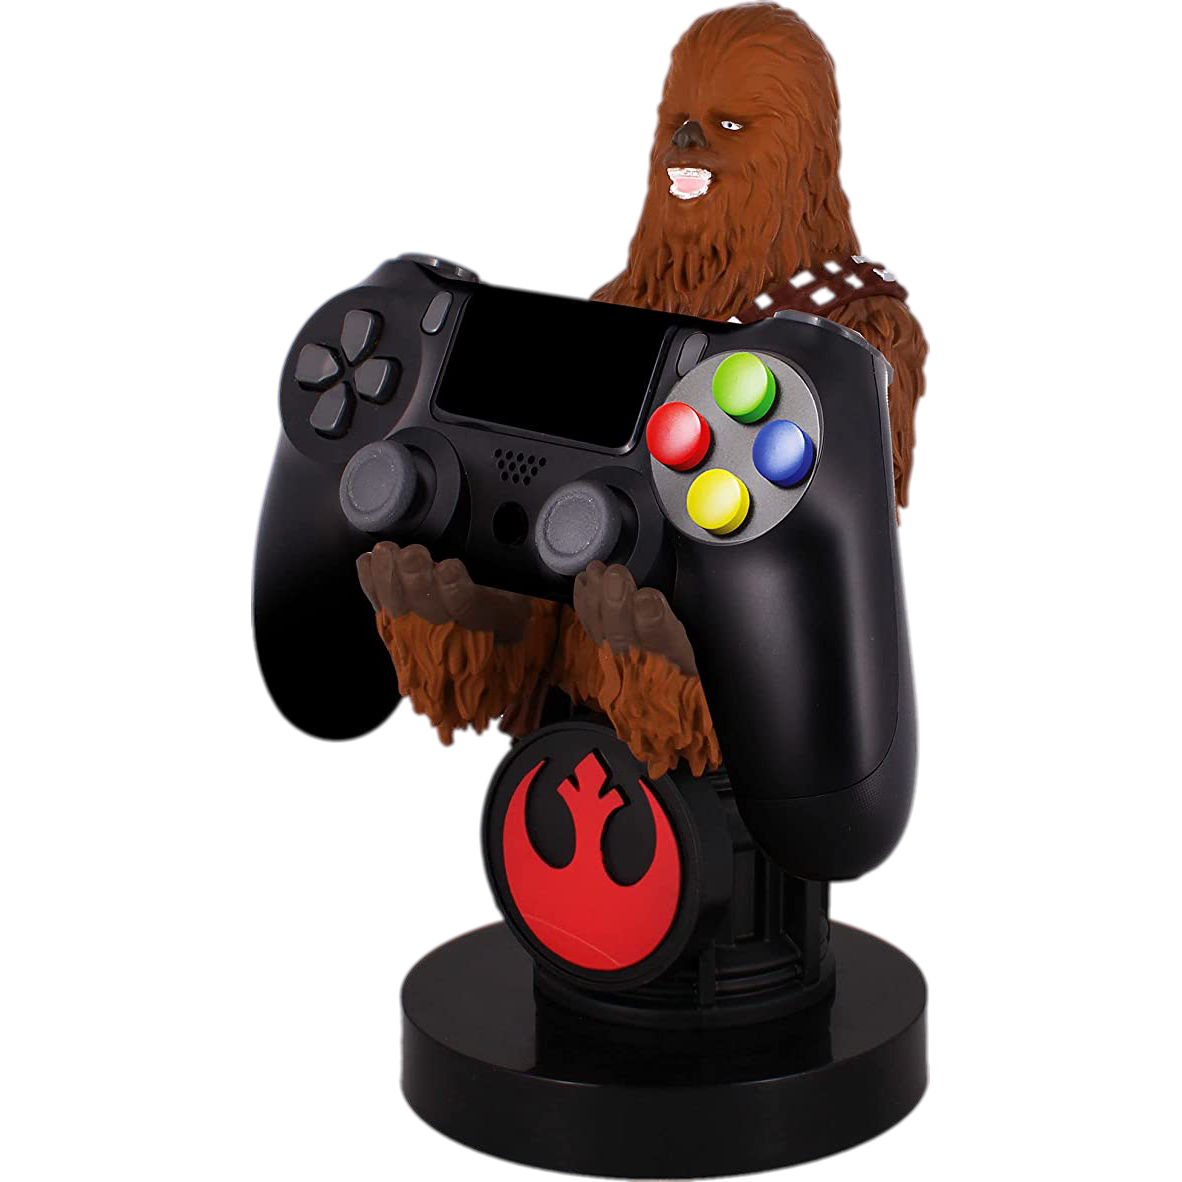 Cable_20Guy_20Chewbacca_20Device_20Holder_93021af2-67a4-45a7-ba83-df23cd0c7f99